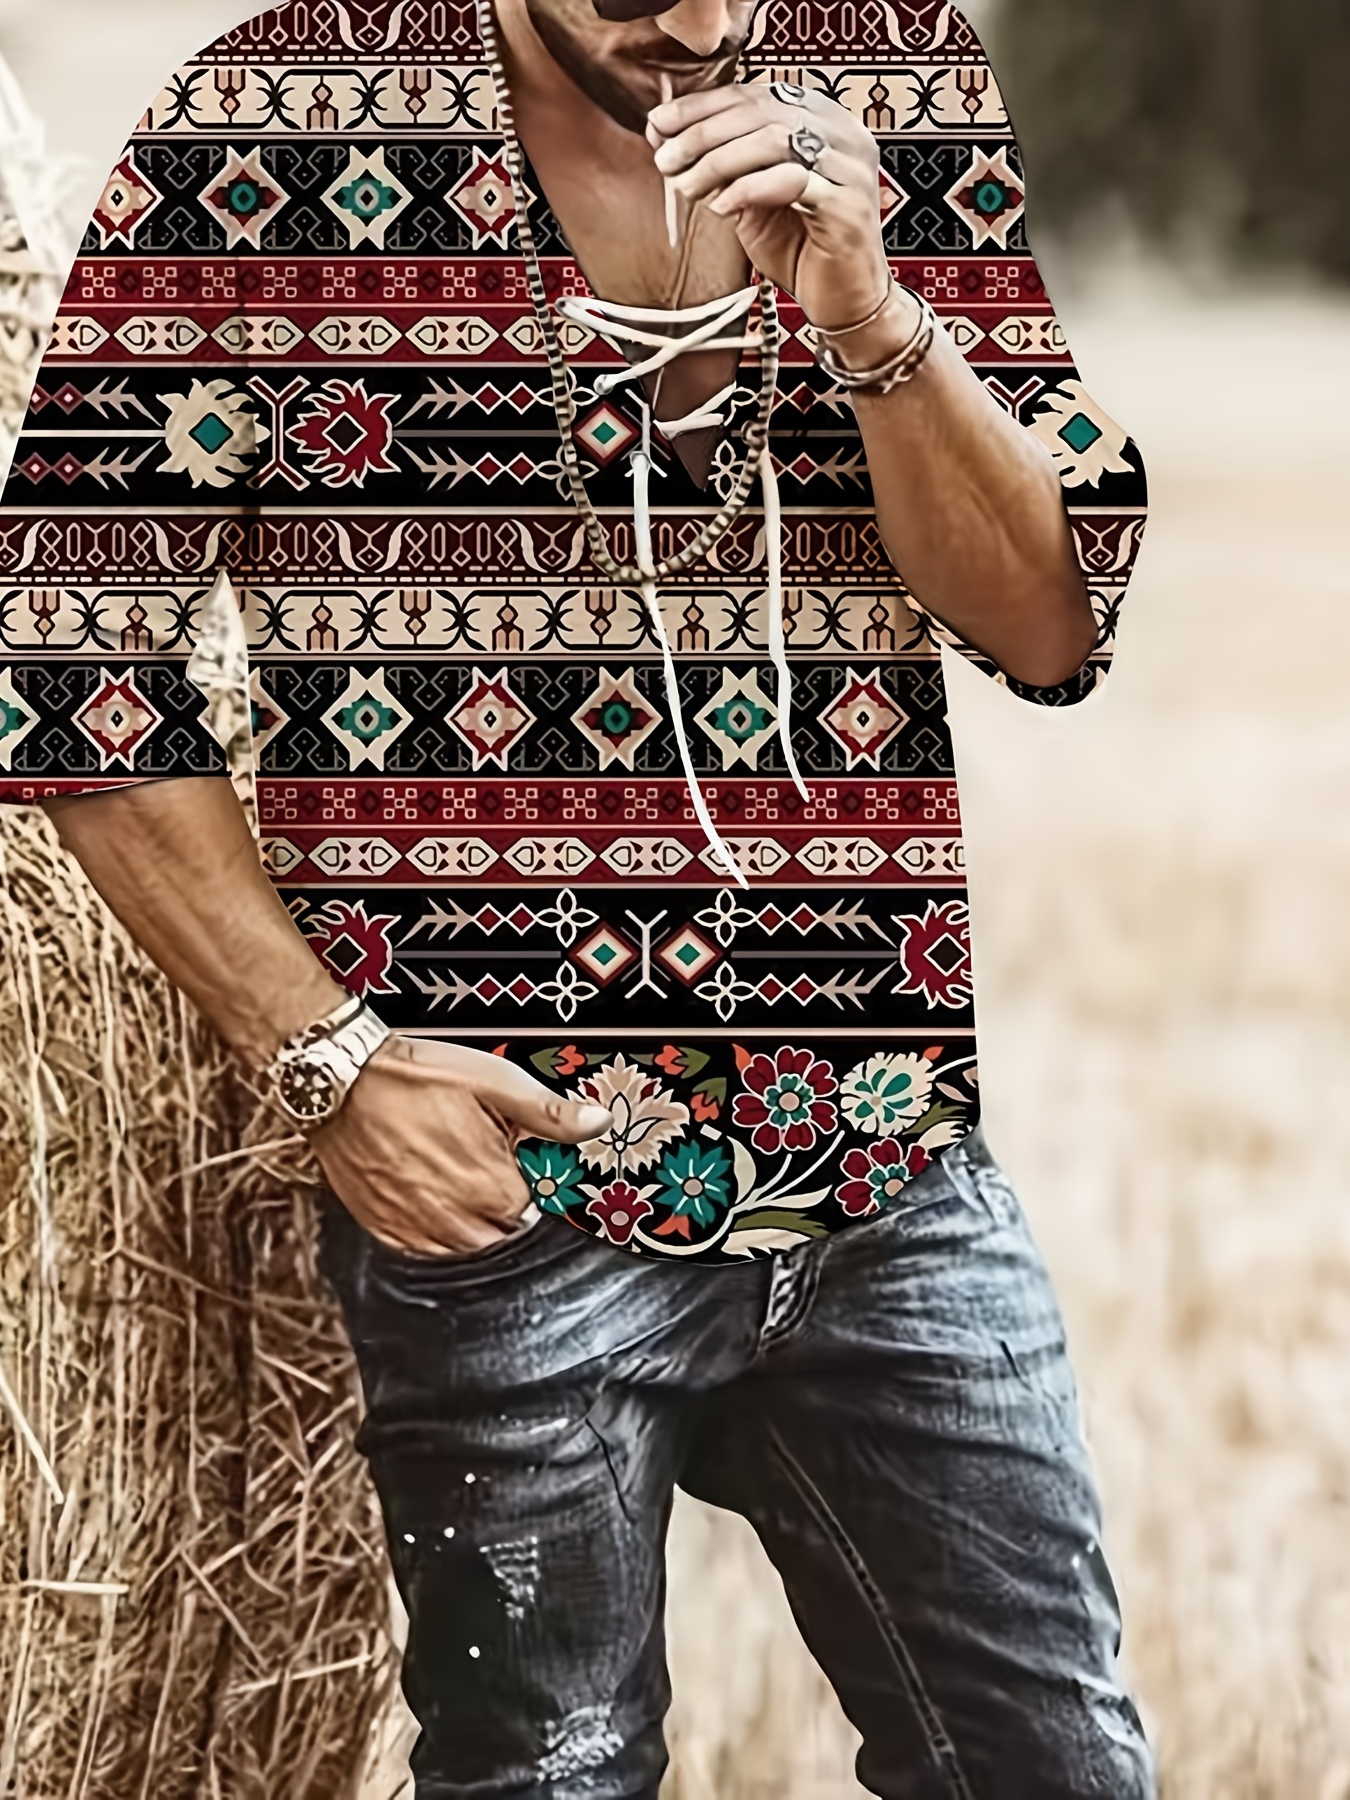 Boho Style Hippie Guys - Fashion Coloring Book for Adults: Handsome Men  Wearing Bohemian Chic Clothing & Accessories (Fashion Coloring for Teens 